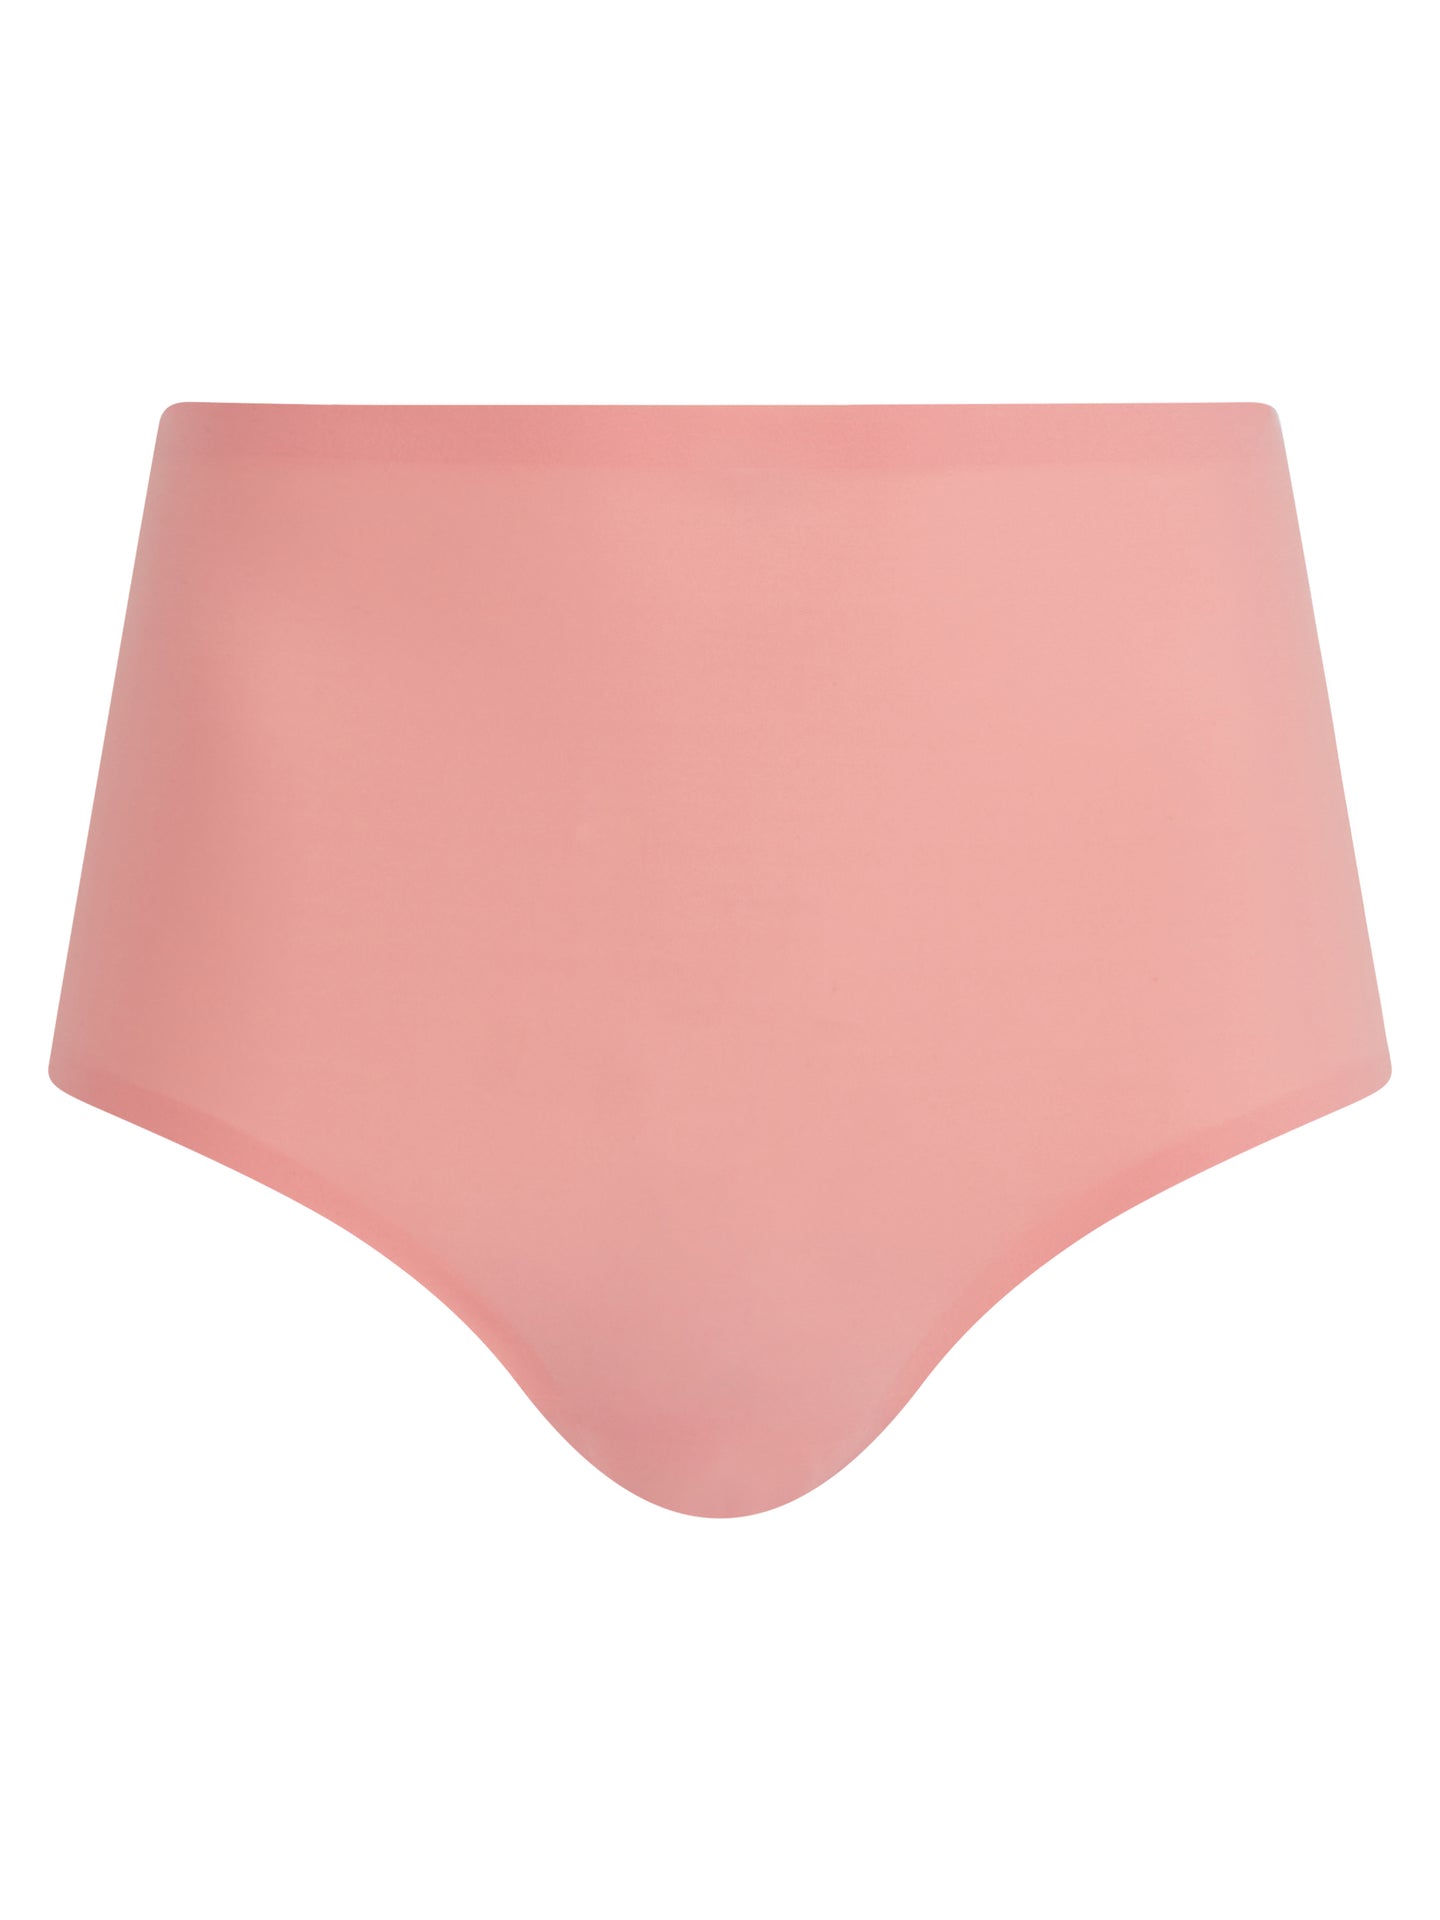 Chantelle Soft Stretch High Waisted Brief Plus Size - Candlelight Peach